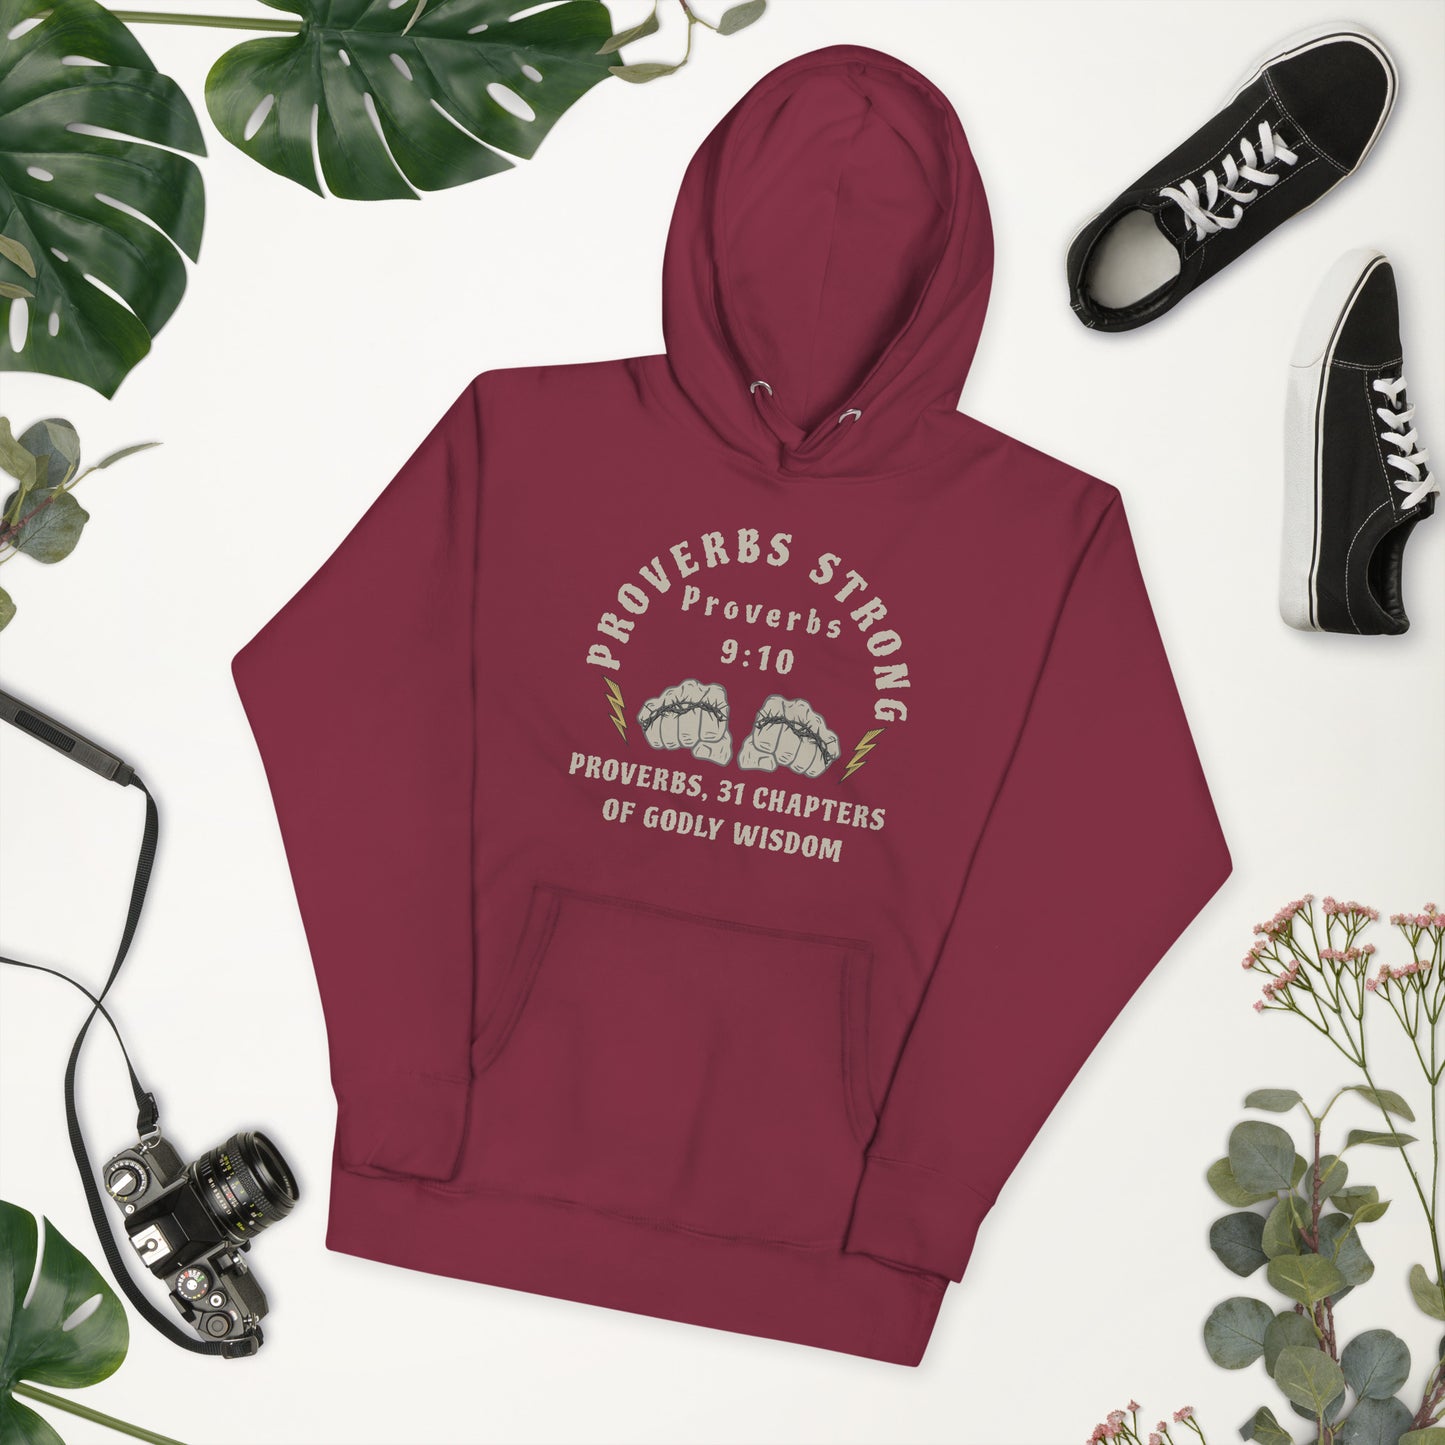 Proverbs Strong Unisex Hoodie By Holy Shirtz